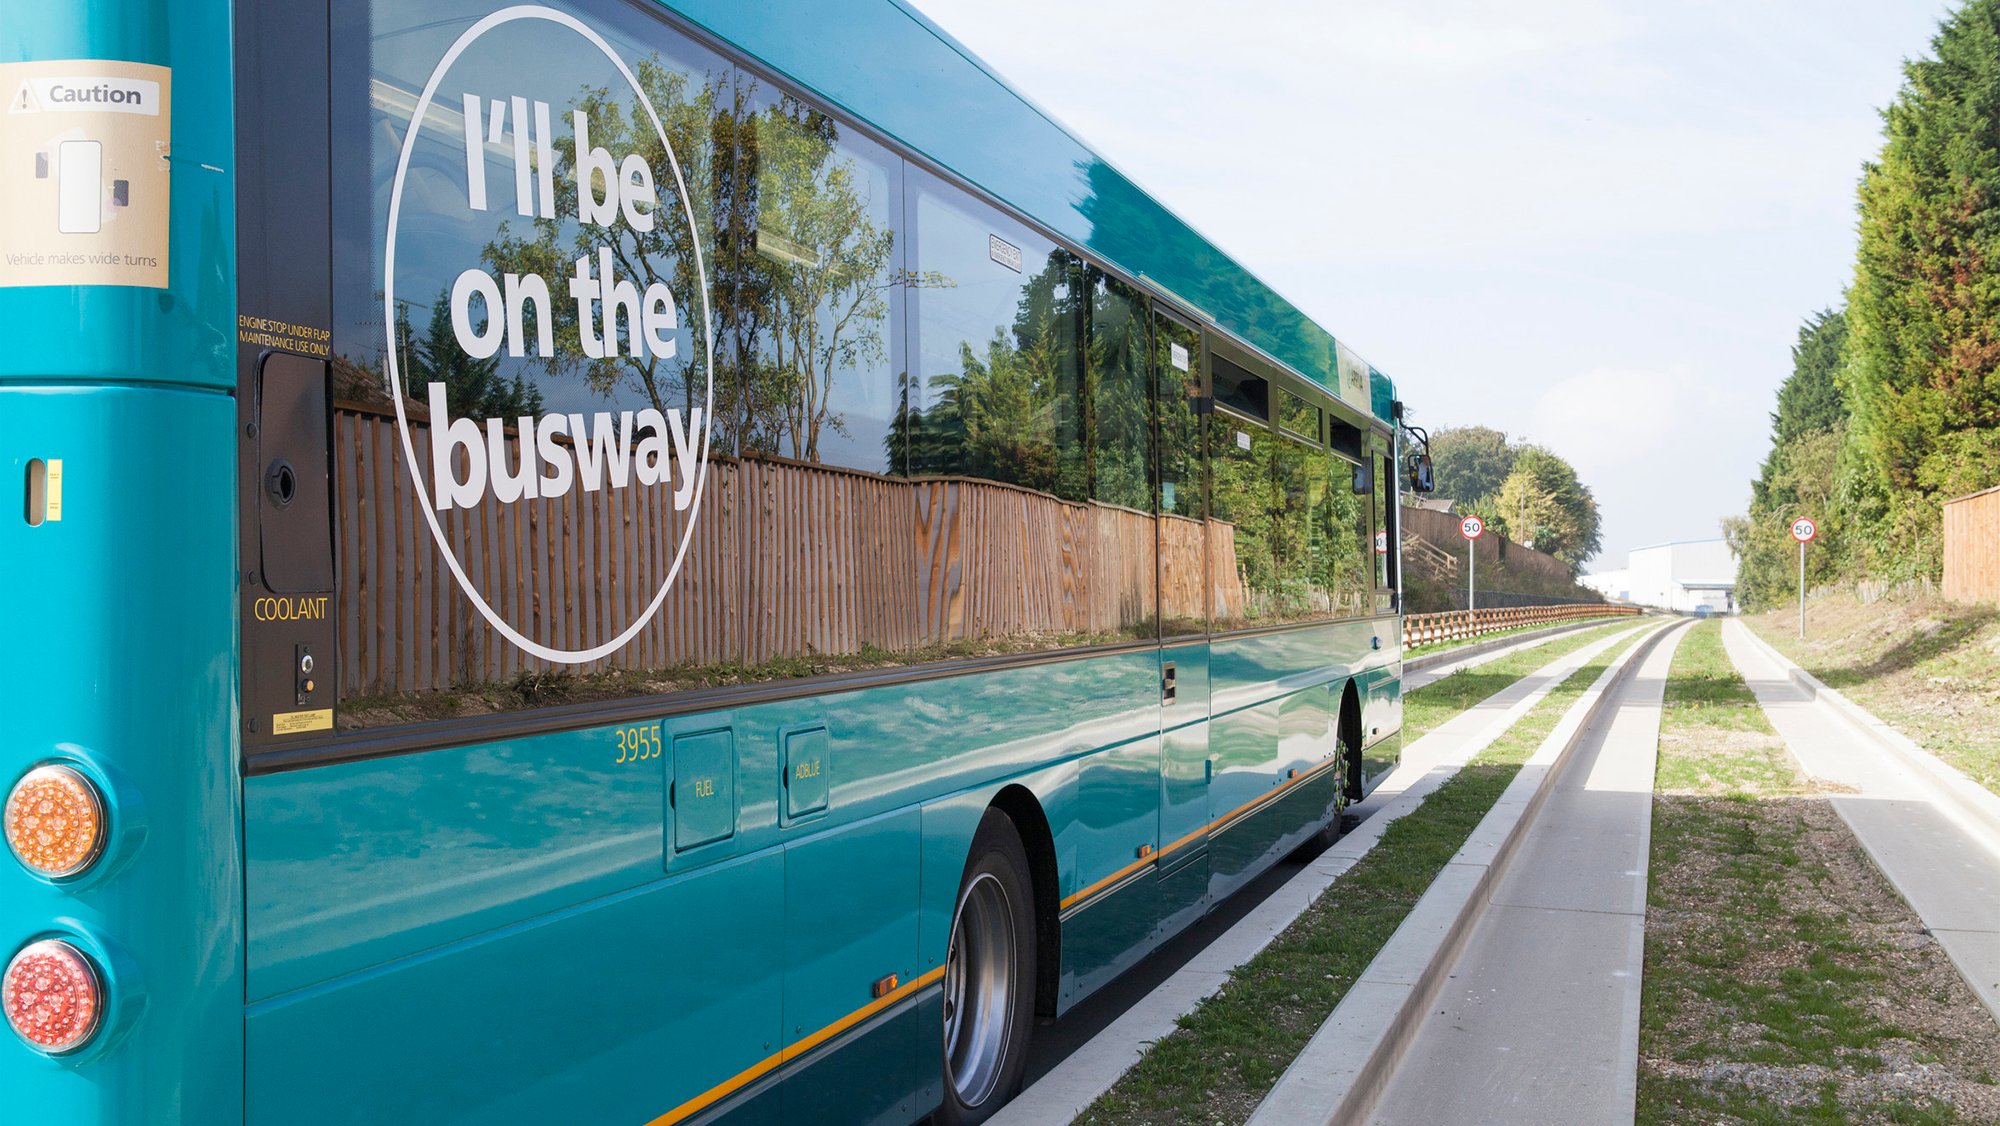 The Luton Busway provides 10km of twin guided busway public system.